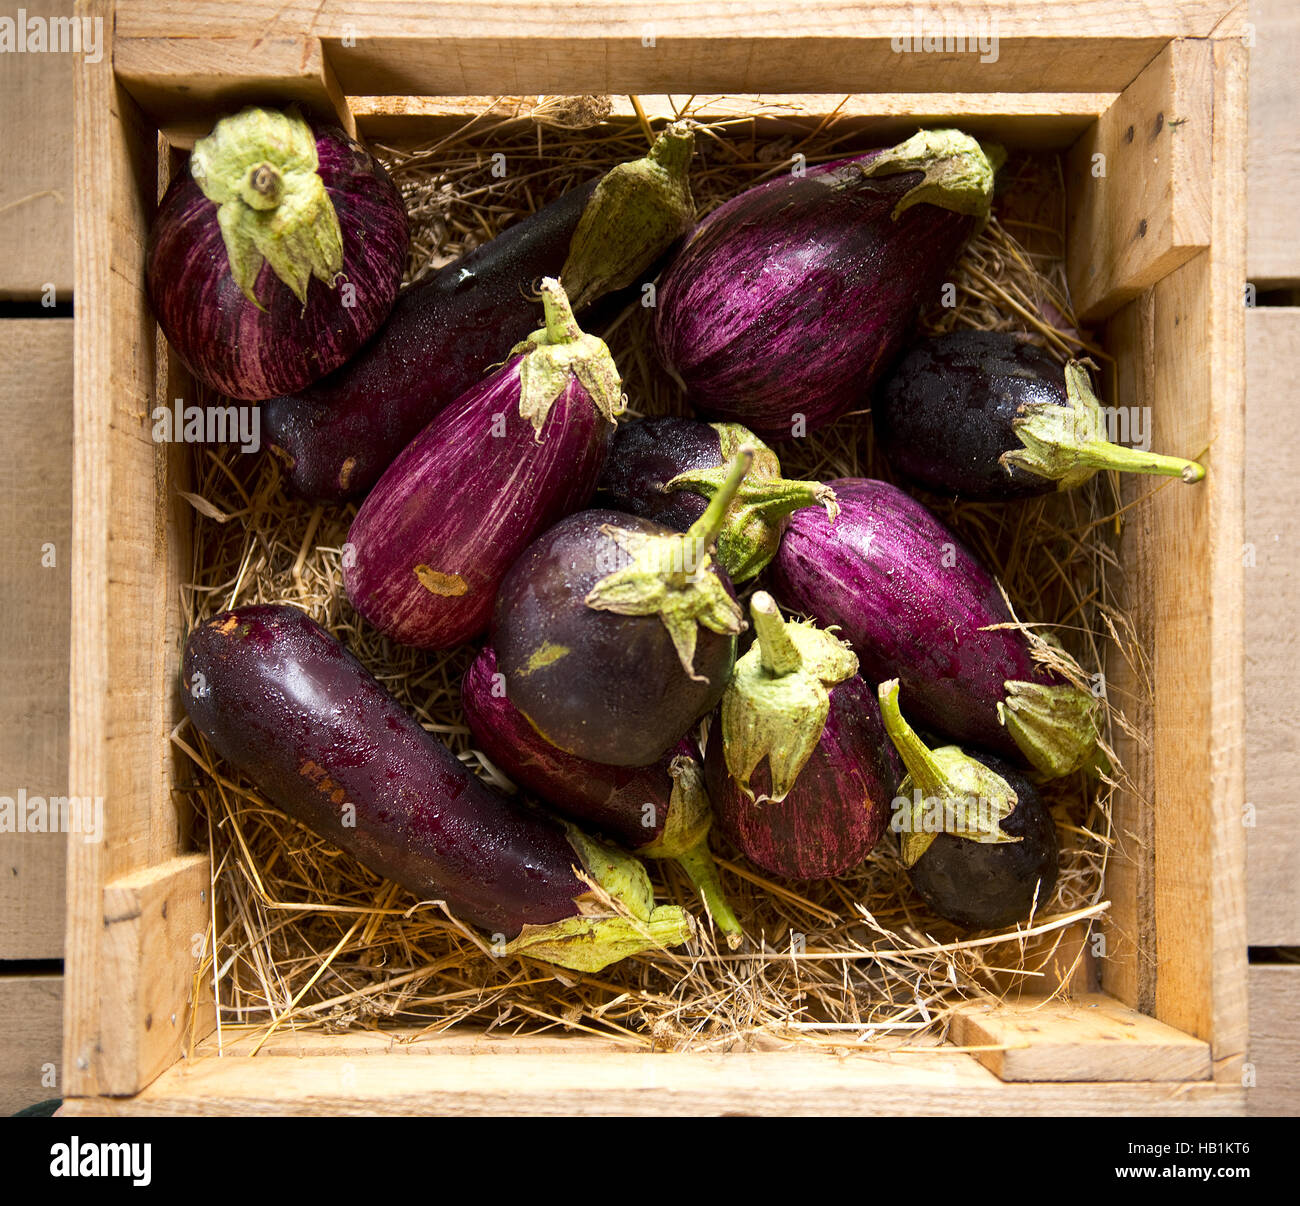 eggplants in a wooden box Stock Photo